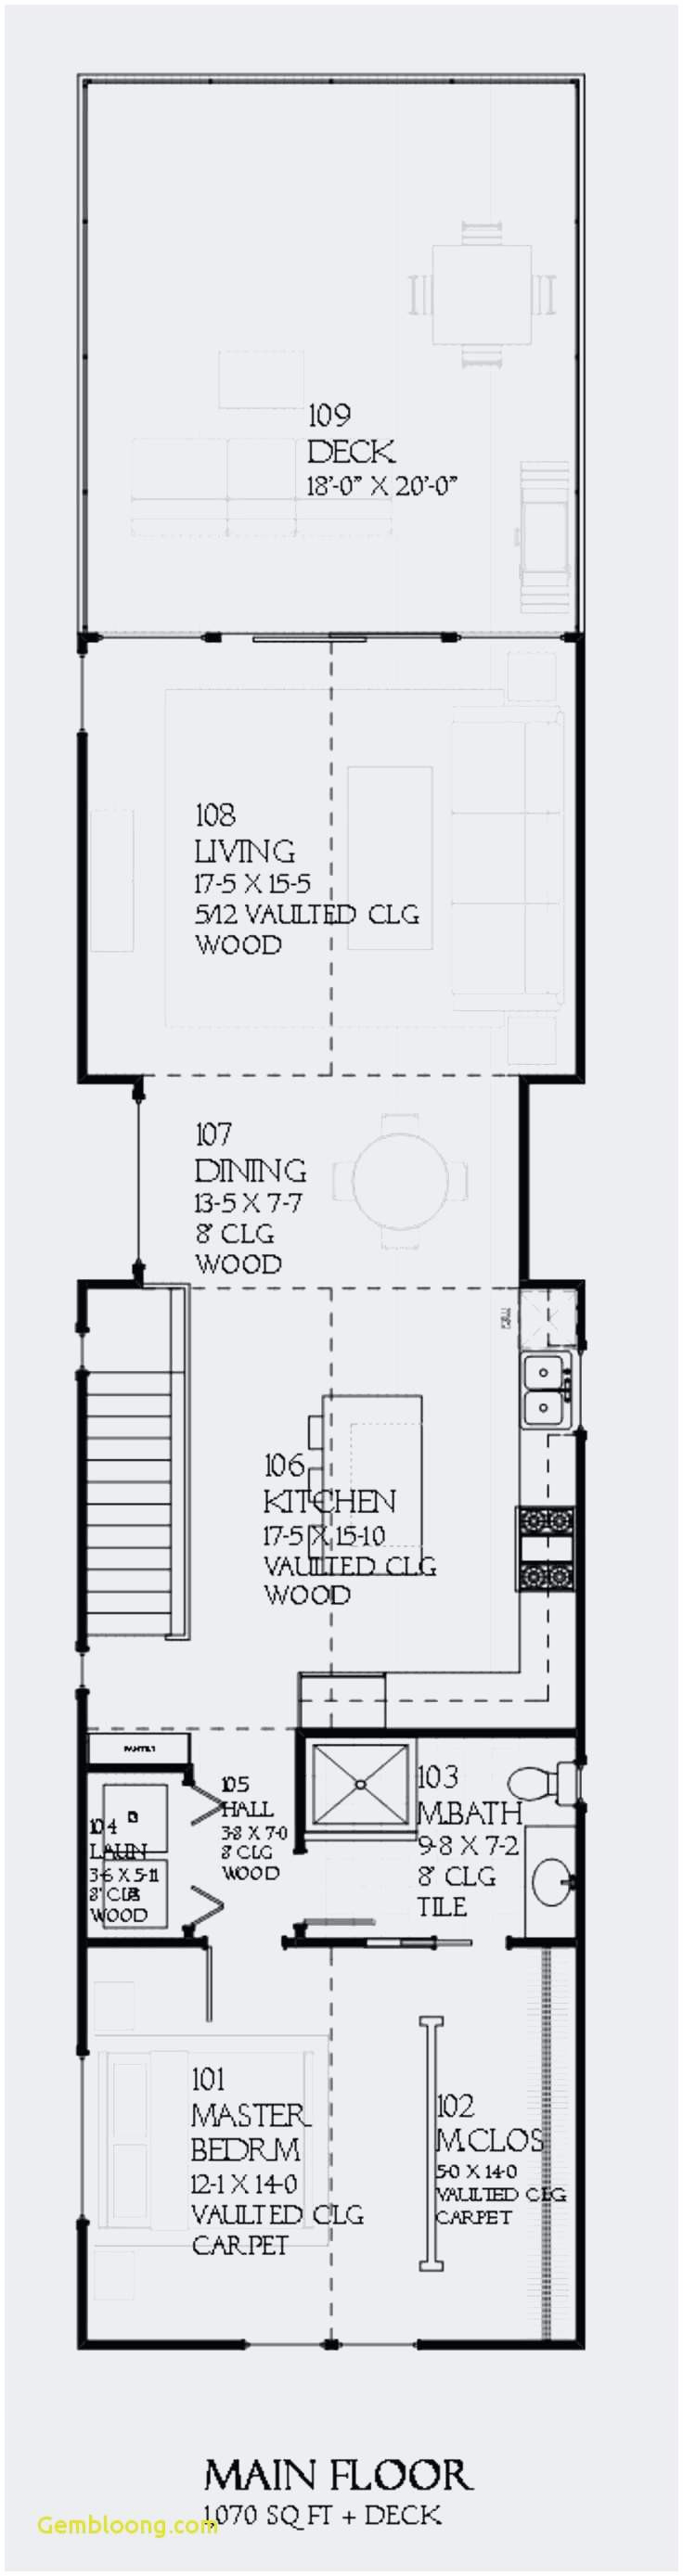 29 Lovely Hardwood Floors or Carpet In Bedrooms 2024 free download hardwood floors or carpet in bedrooms of 44 choice bedroom carpet tiles scheme independentinnovation net with 0d ac2b7 family diagram awesome architectural home plans family house plans awes